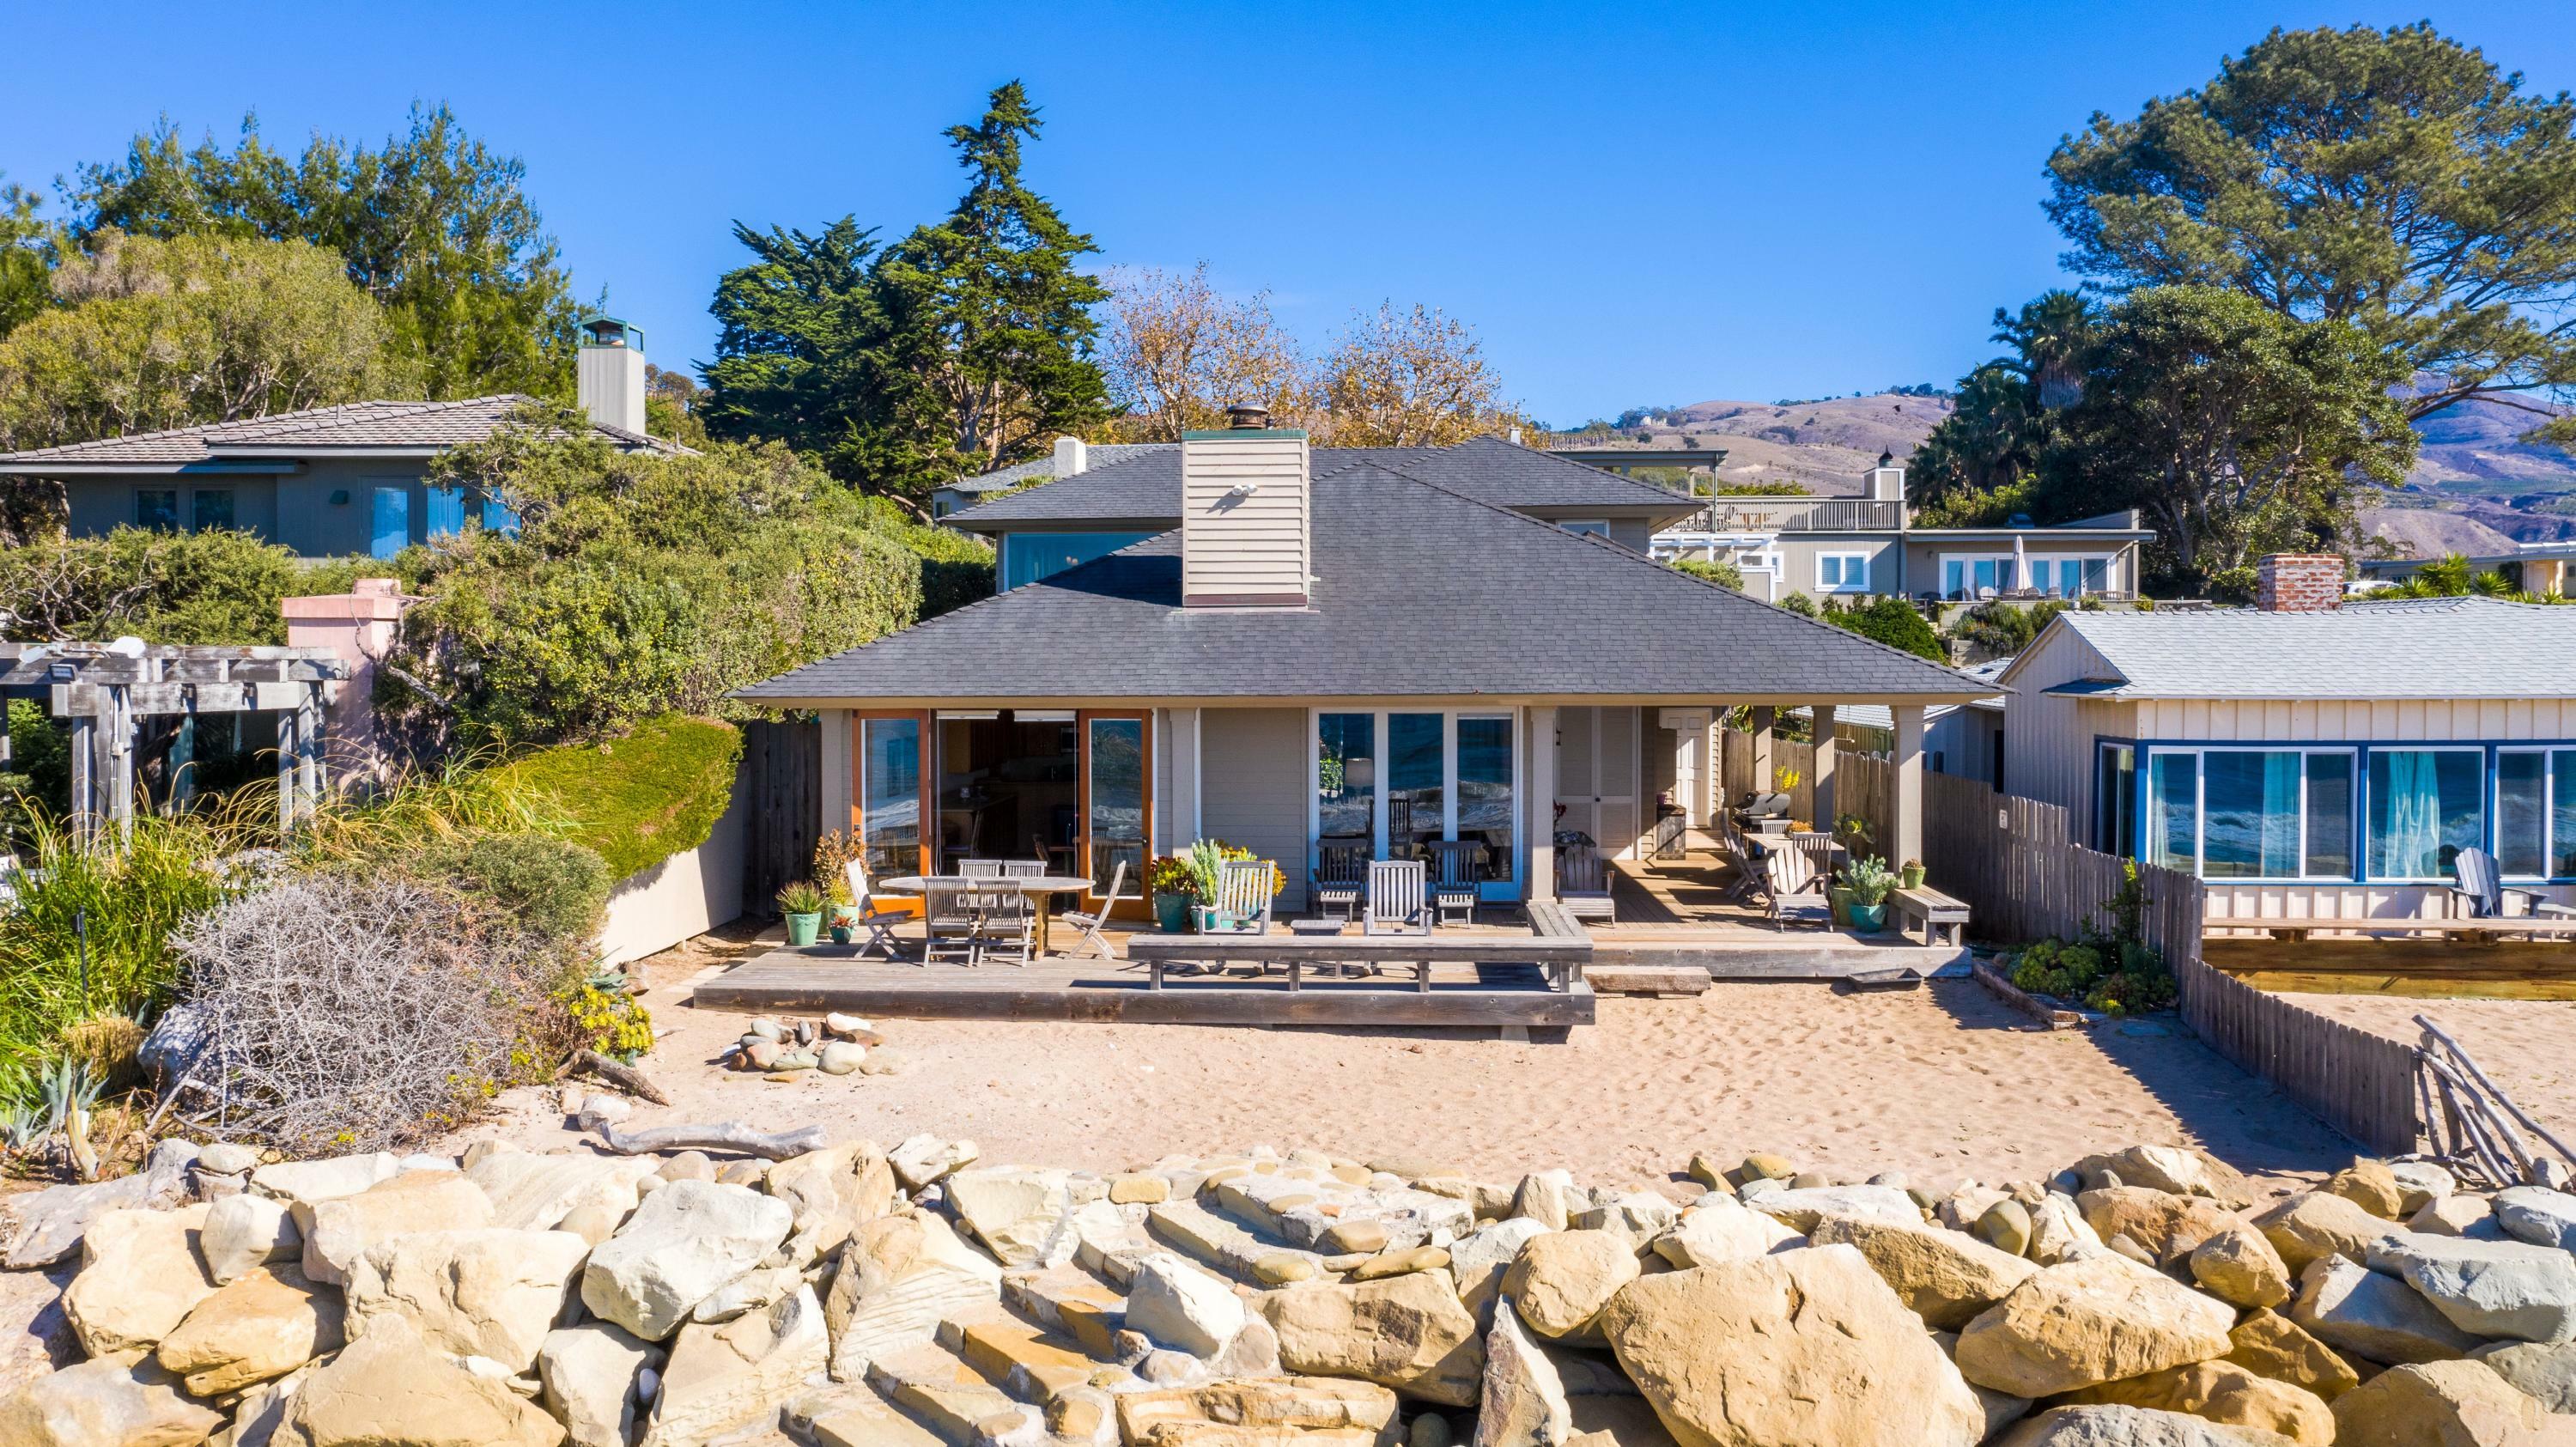 Property Photo:  124 Rincon Point Rd  CA 93013 